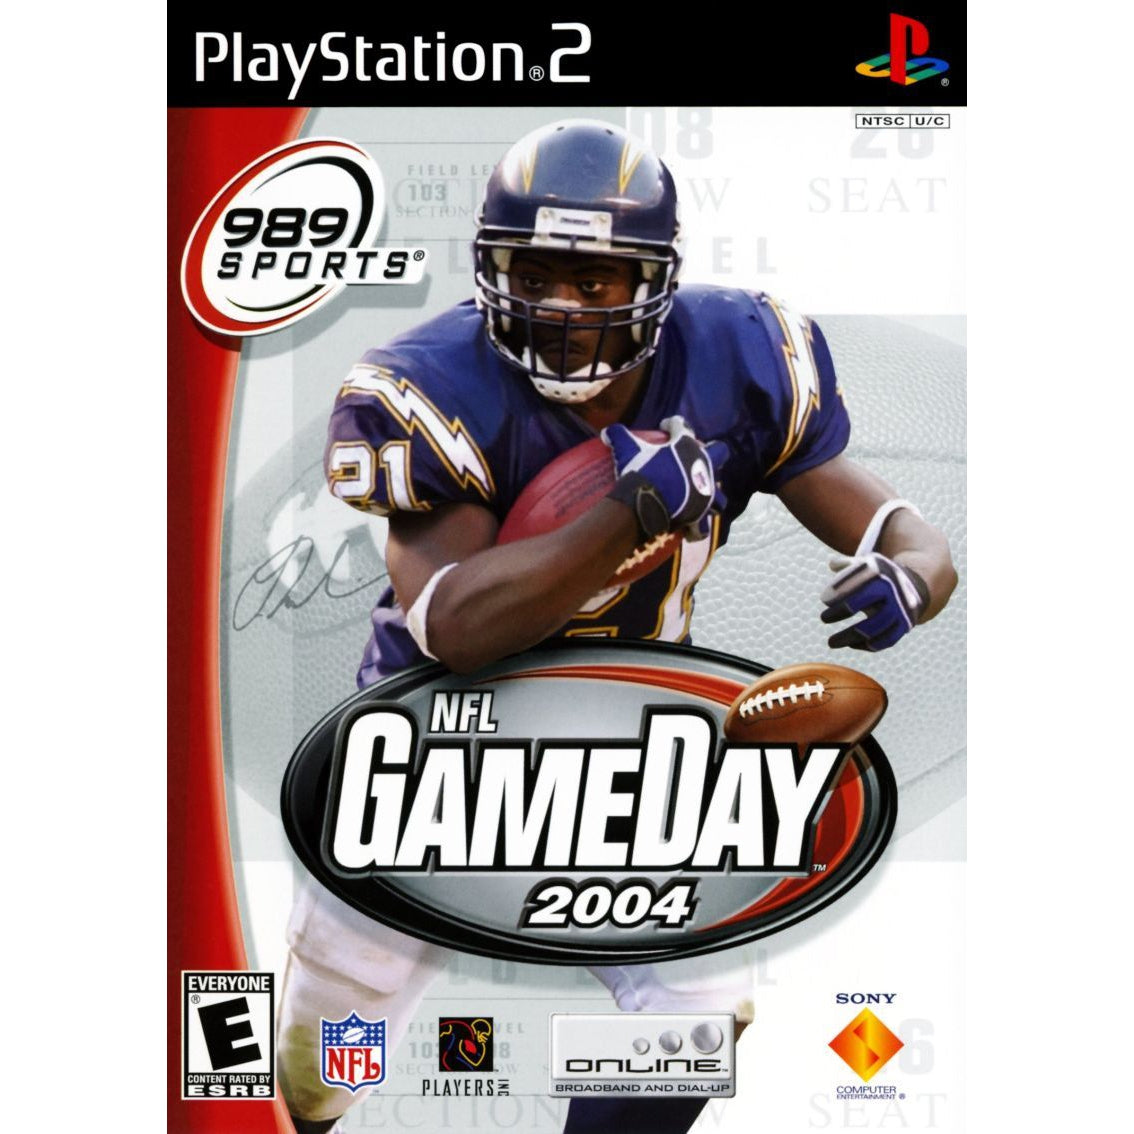 NFL GameDay 2004 - PlayStation 2 (PS2) Game Complete - YourGamingShop.com - Buy, Sell, Trade Video Games Online. 120 Day Warranty. Satisfaction Guaranteed.